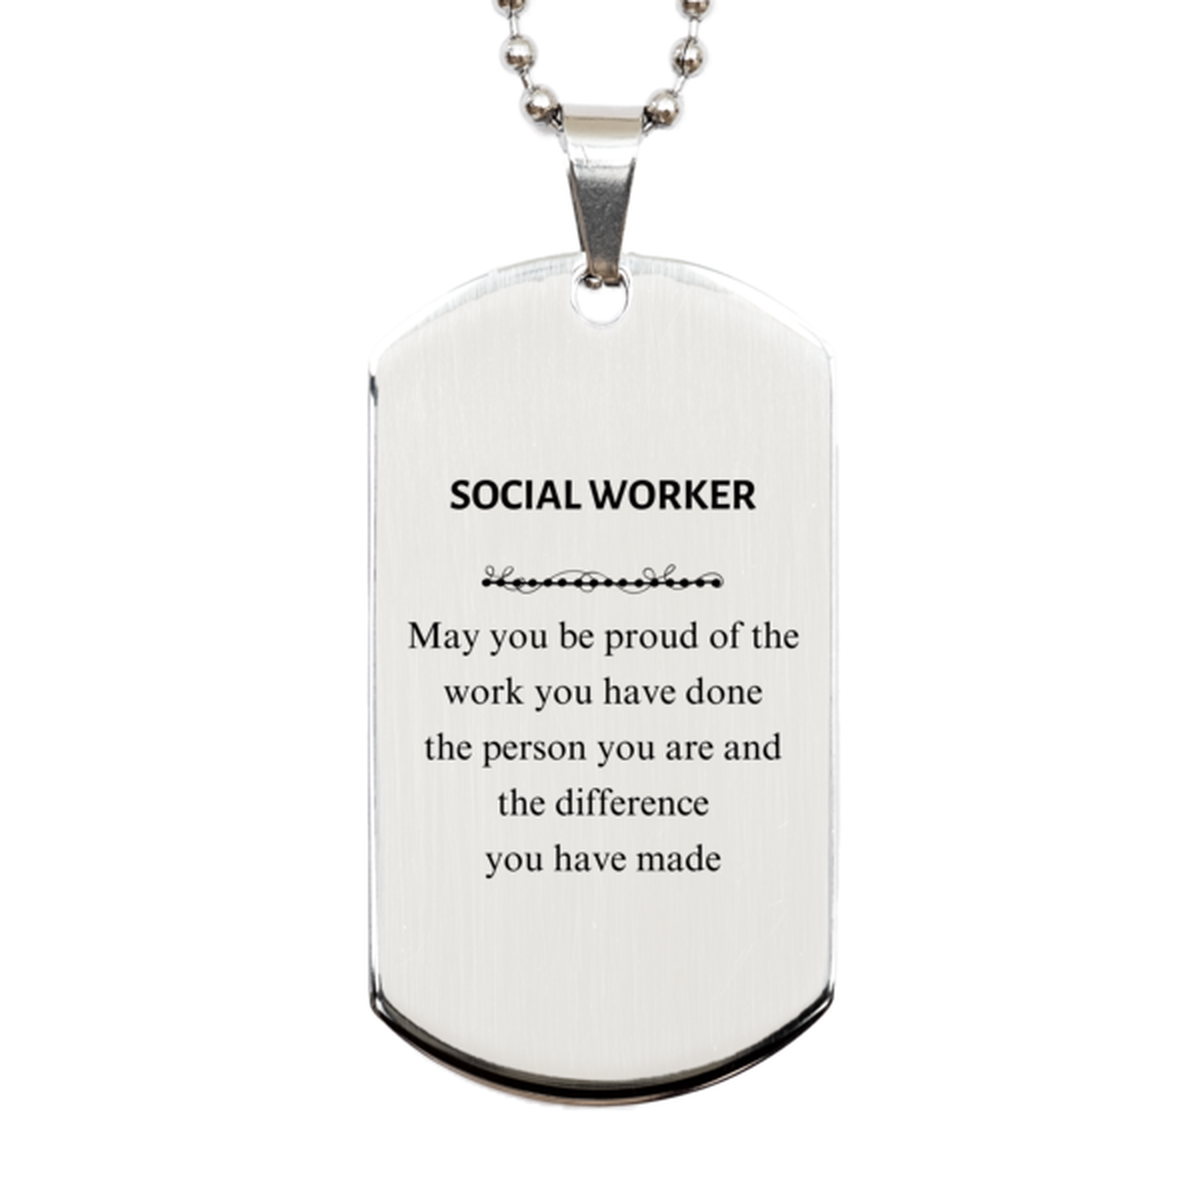 Social Worker May you be proud of the work you have done, Retirement Social Worker Silver Dog Tag for Colleague Appreciation Gifts Amazing for Social Worker